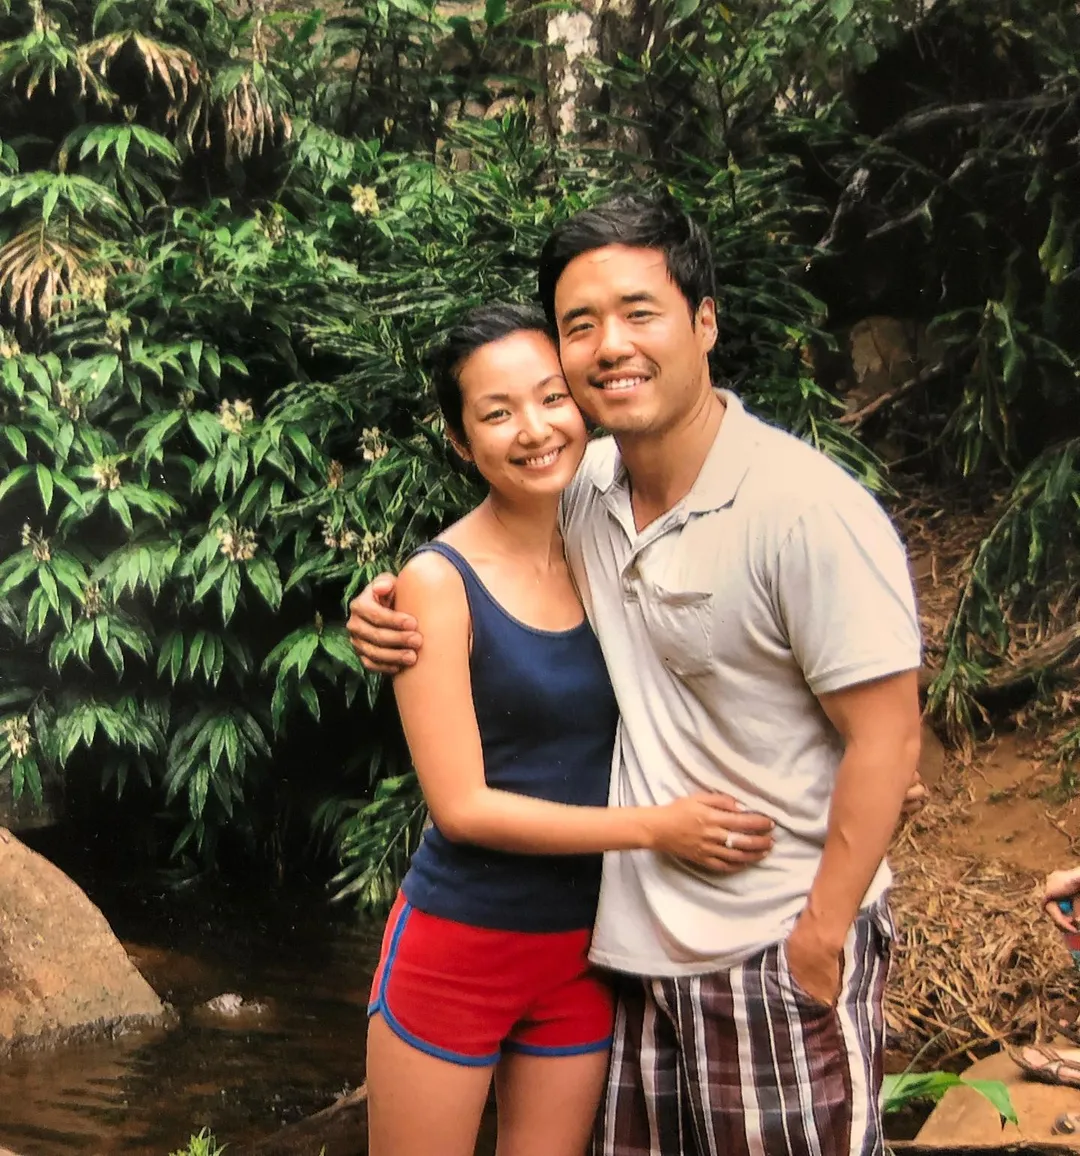 Jae Suh Park and Randall Park went to Hawaii on their honeymoon after their wedding